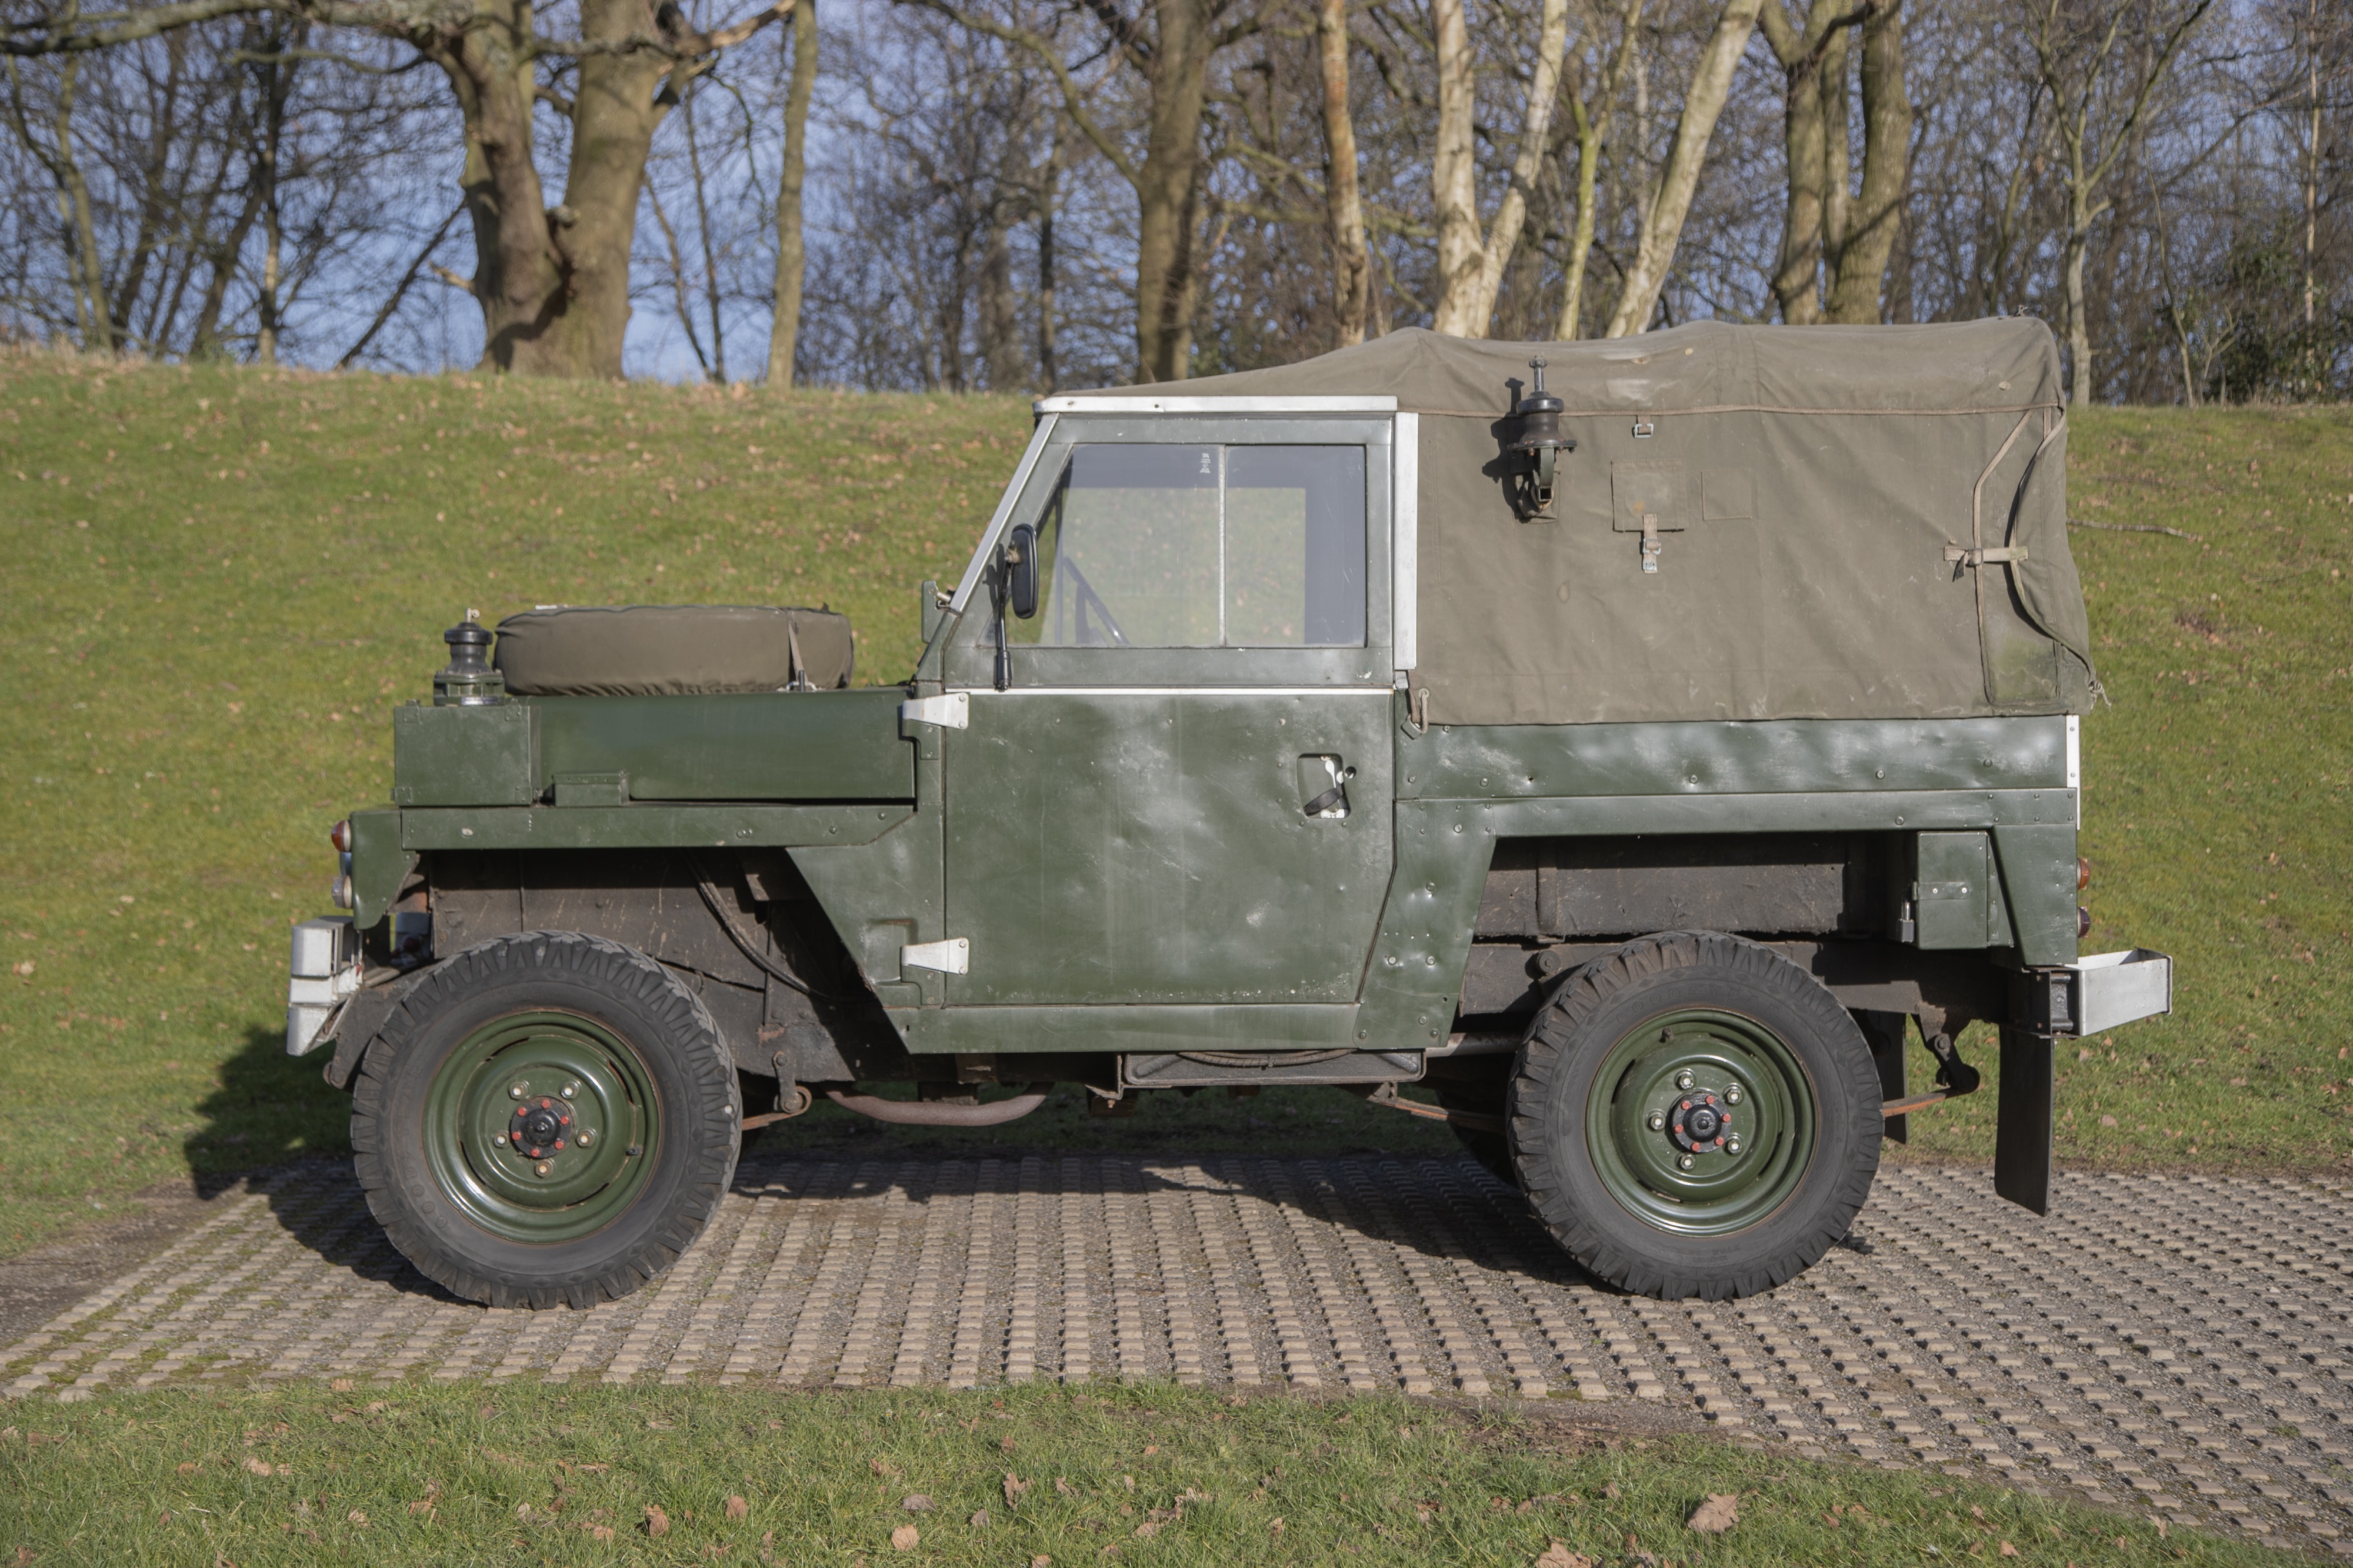 1976 LAND ROVER SERIES III 88 for sale by auction in Ascot, Berkshire,  United Kingdom